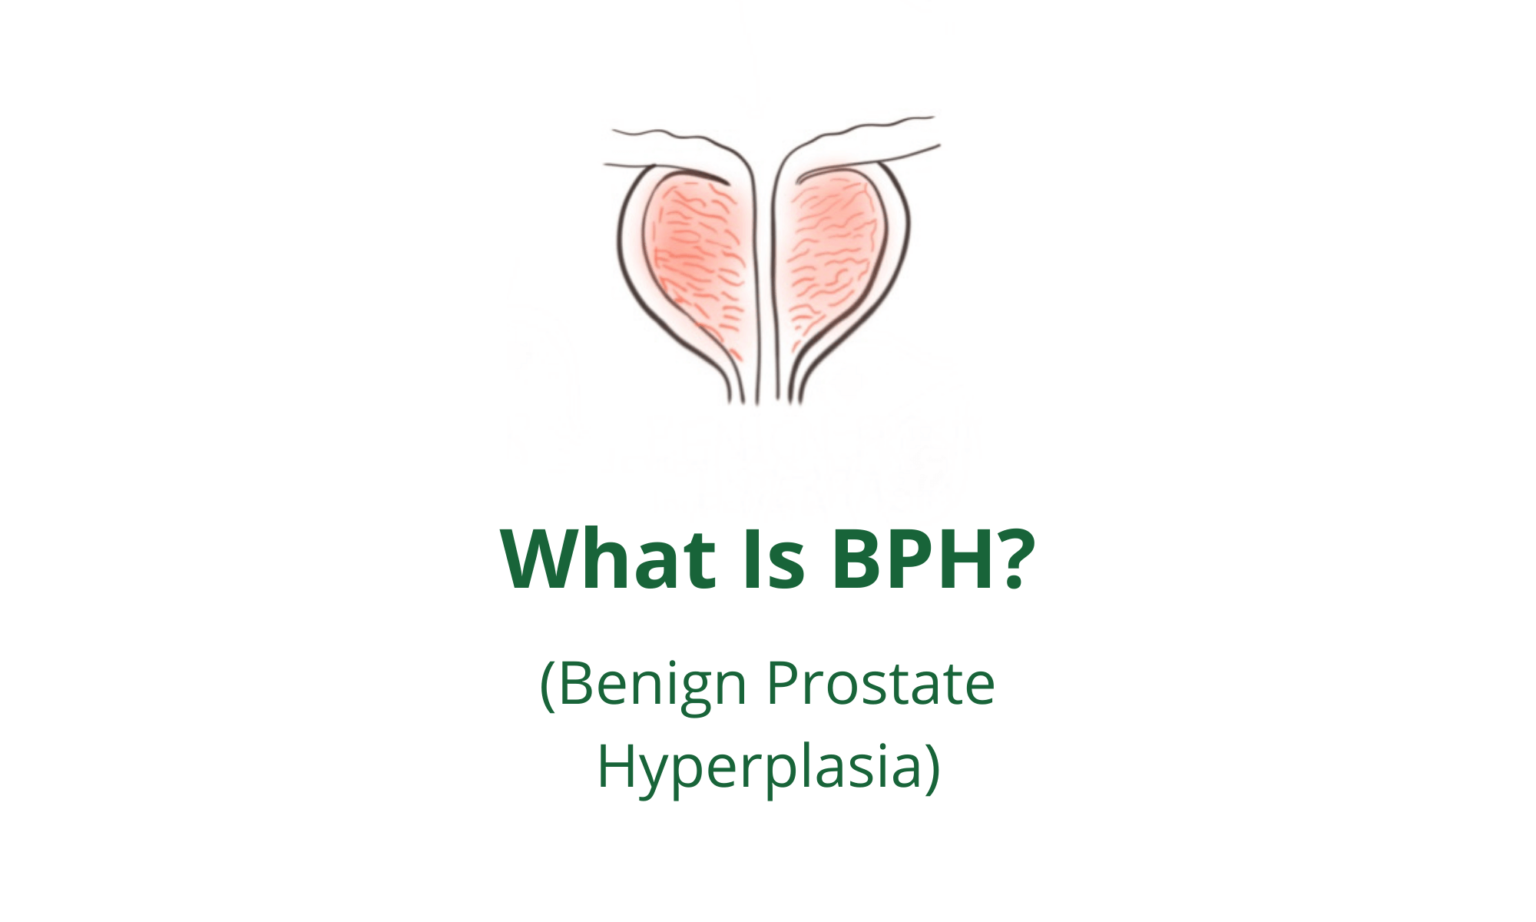 What Is Benign Prostate Hyperplasia? - Pro doctor